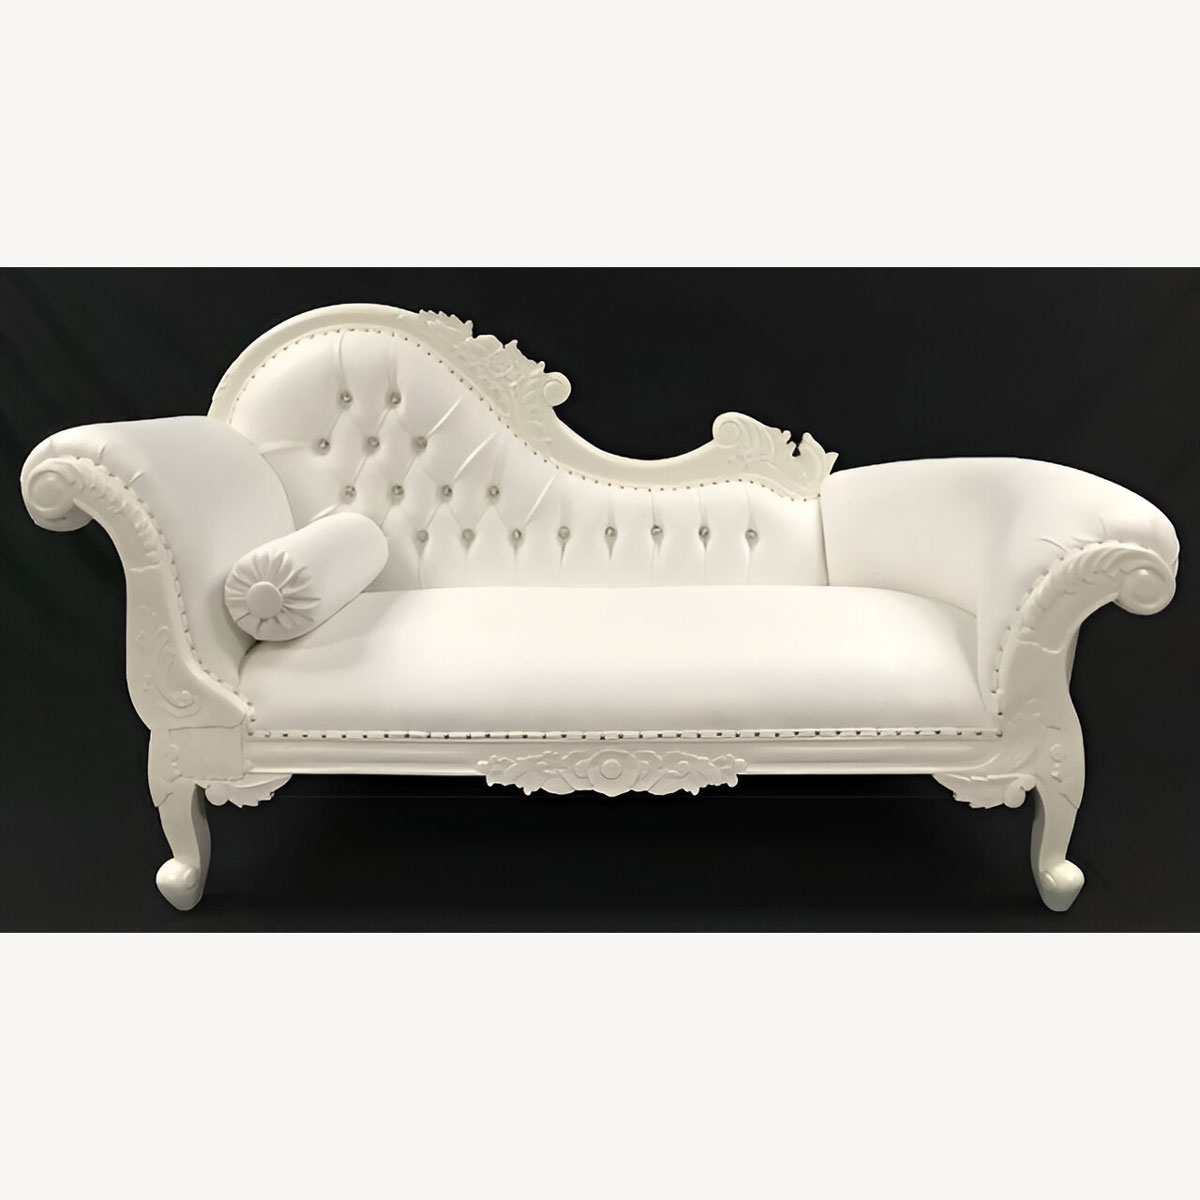 Hampshire Chaise In Gloss Lacquered White With Bright White Faux Leather With Crystals 1 - Hampshire Barn Interiors - About Us -